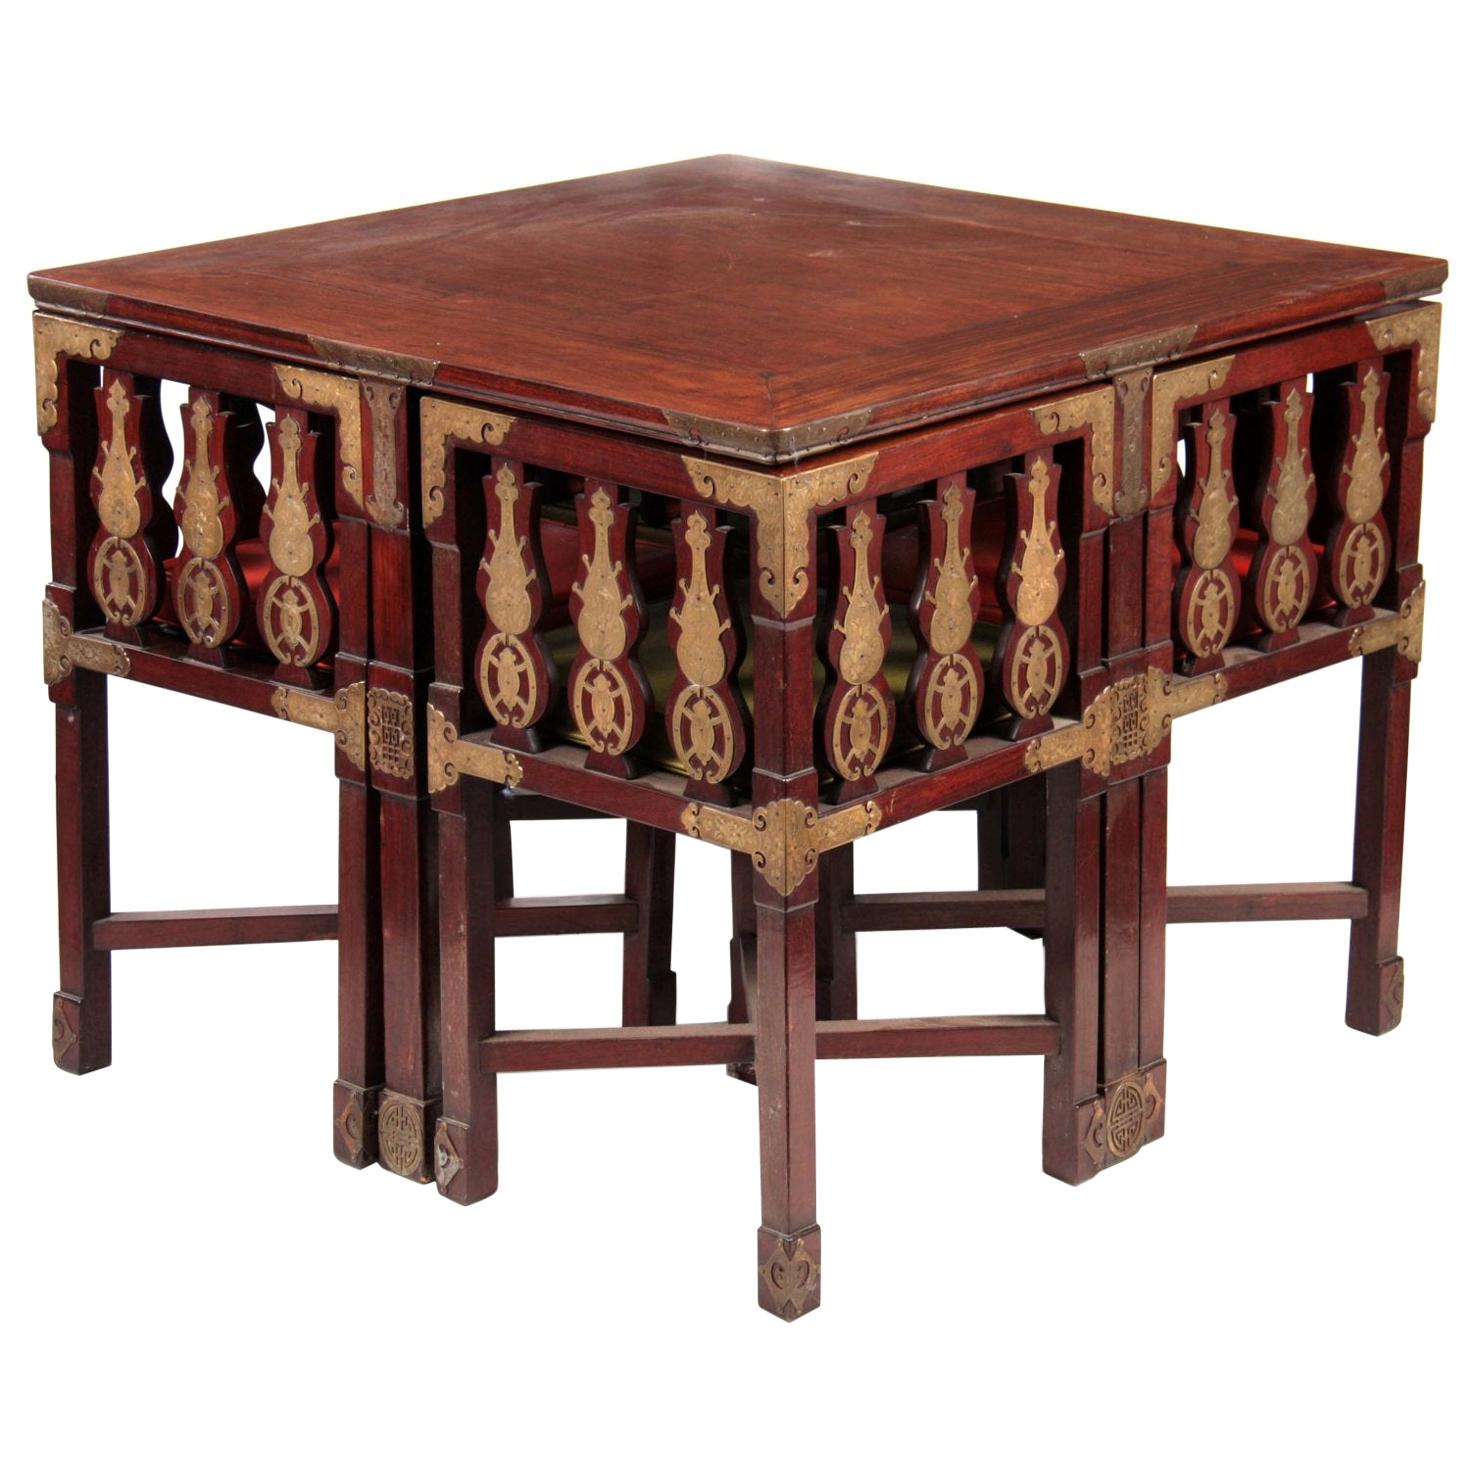 Japanese Rosewood Dining Table & 4 Chairs with Etched Decorative Brass Plaques. For Sale